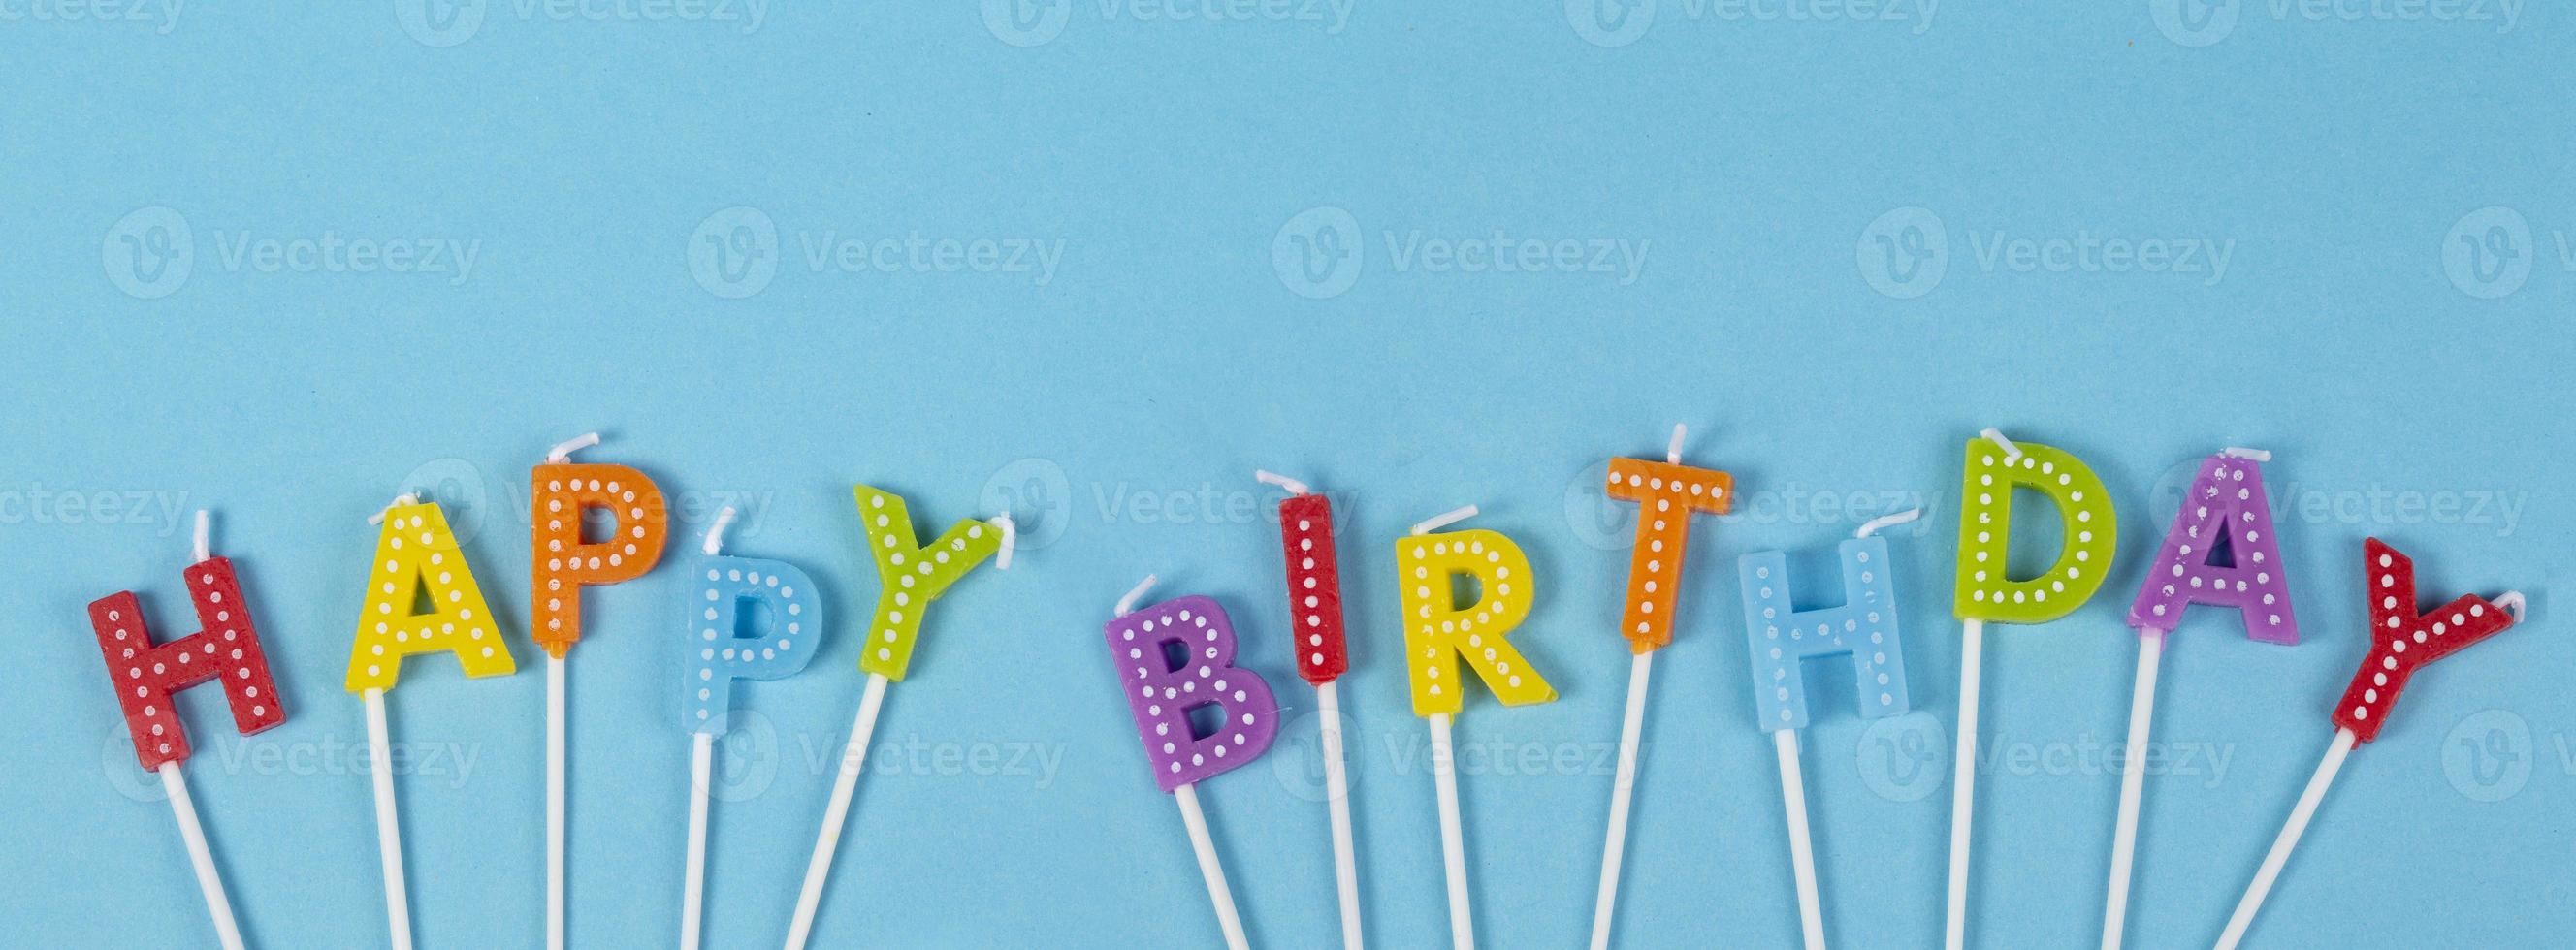 Colorful candles in letters with Happy Birthday lettering isolated on blue narrow background photo